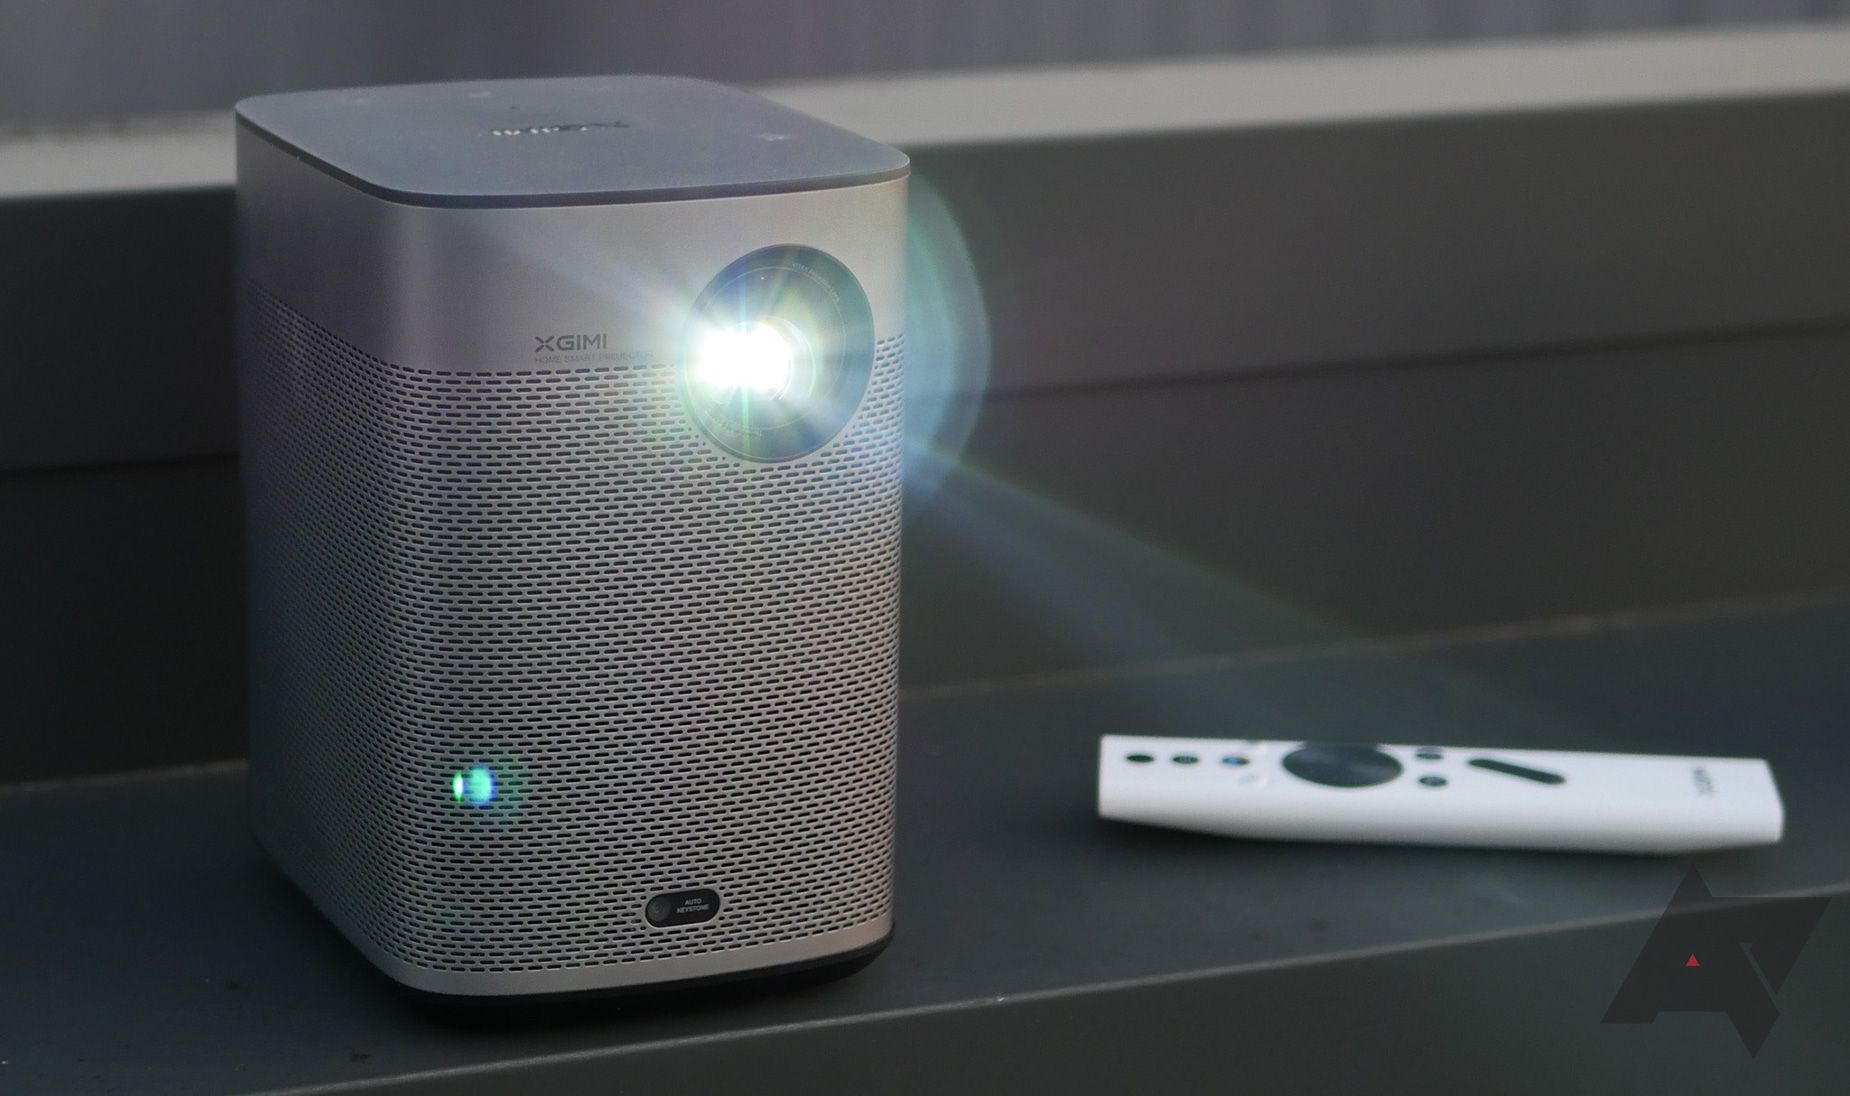 XGIMI Halo+ portable projector gets brighter, smarter, and more